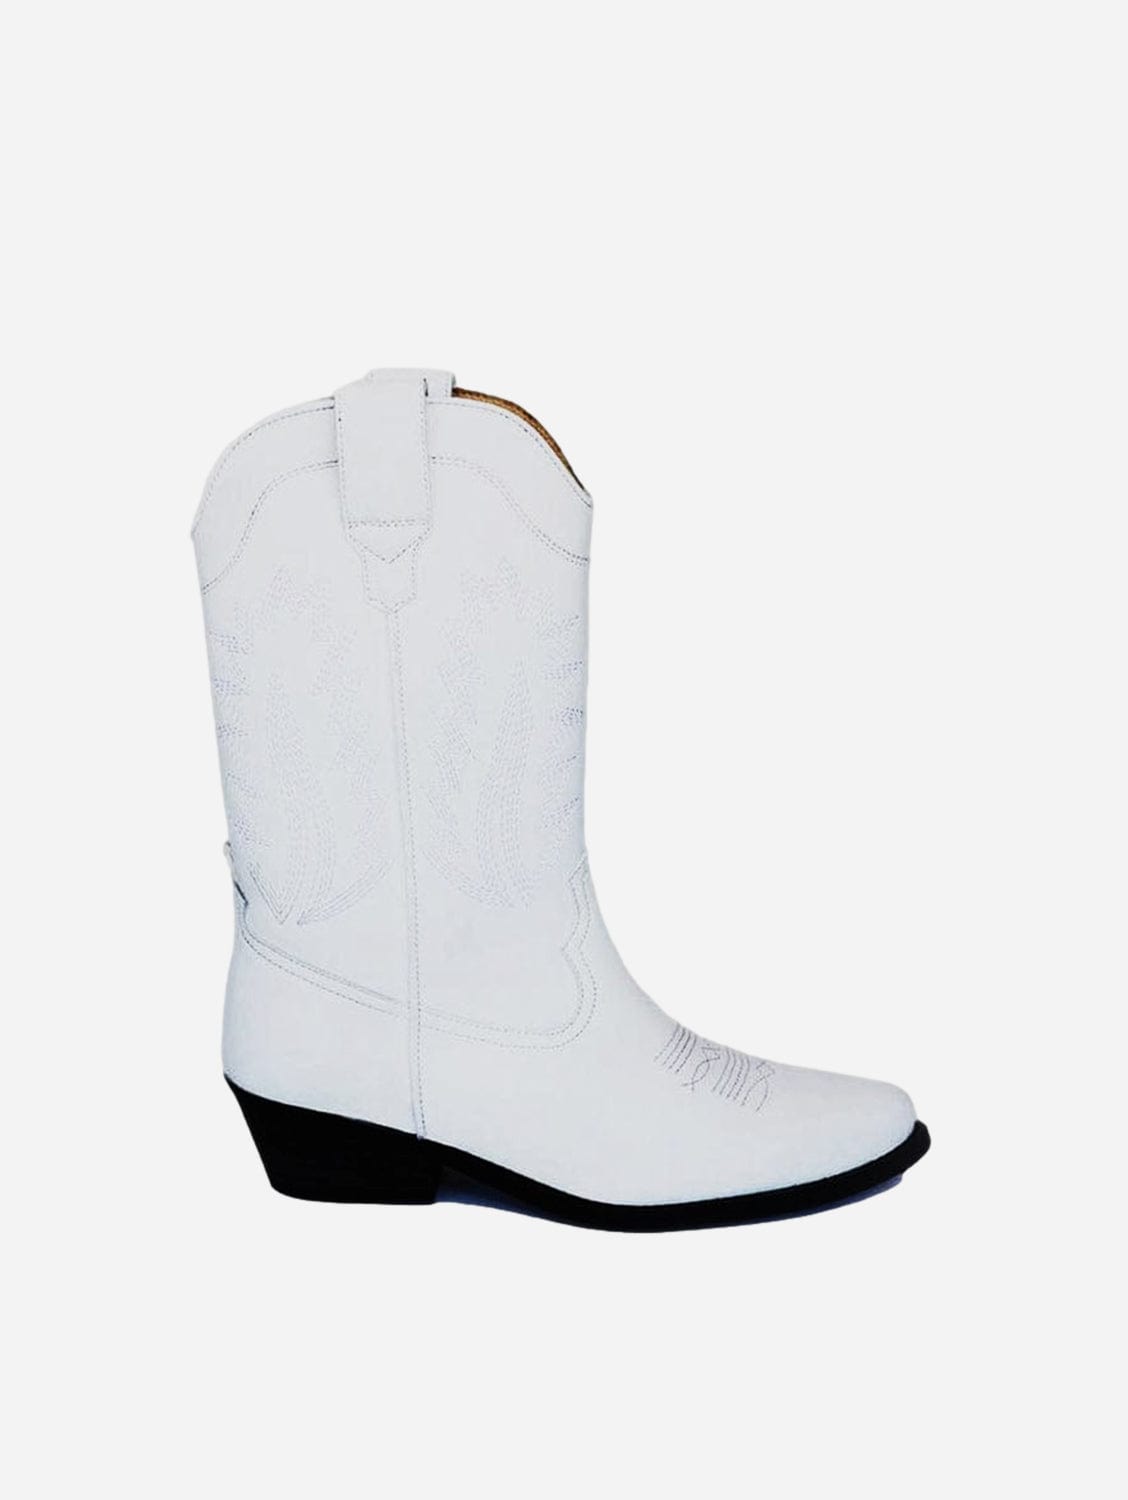 Good Guys Don't Wear Leather Lucky Unisex High Top Cowboy Boots | White White / UK3.5 / EU36 / US6